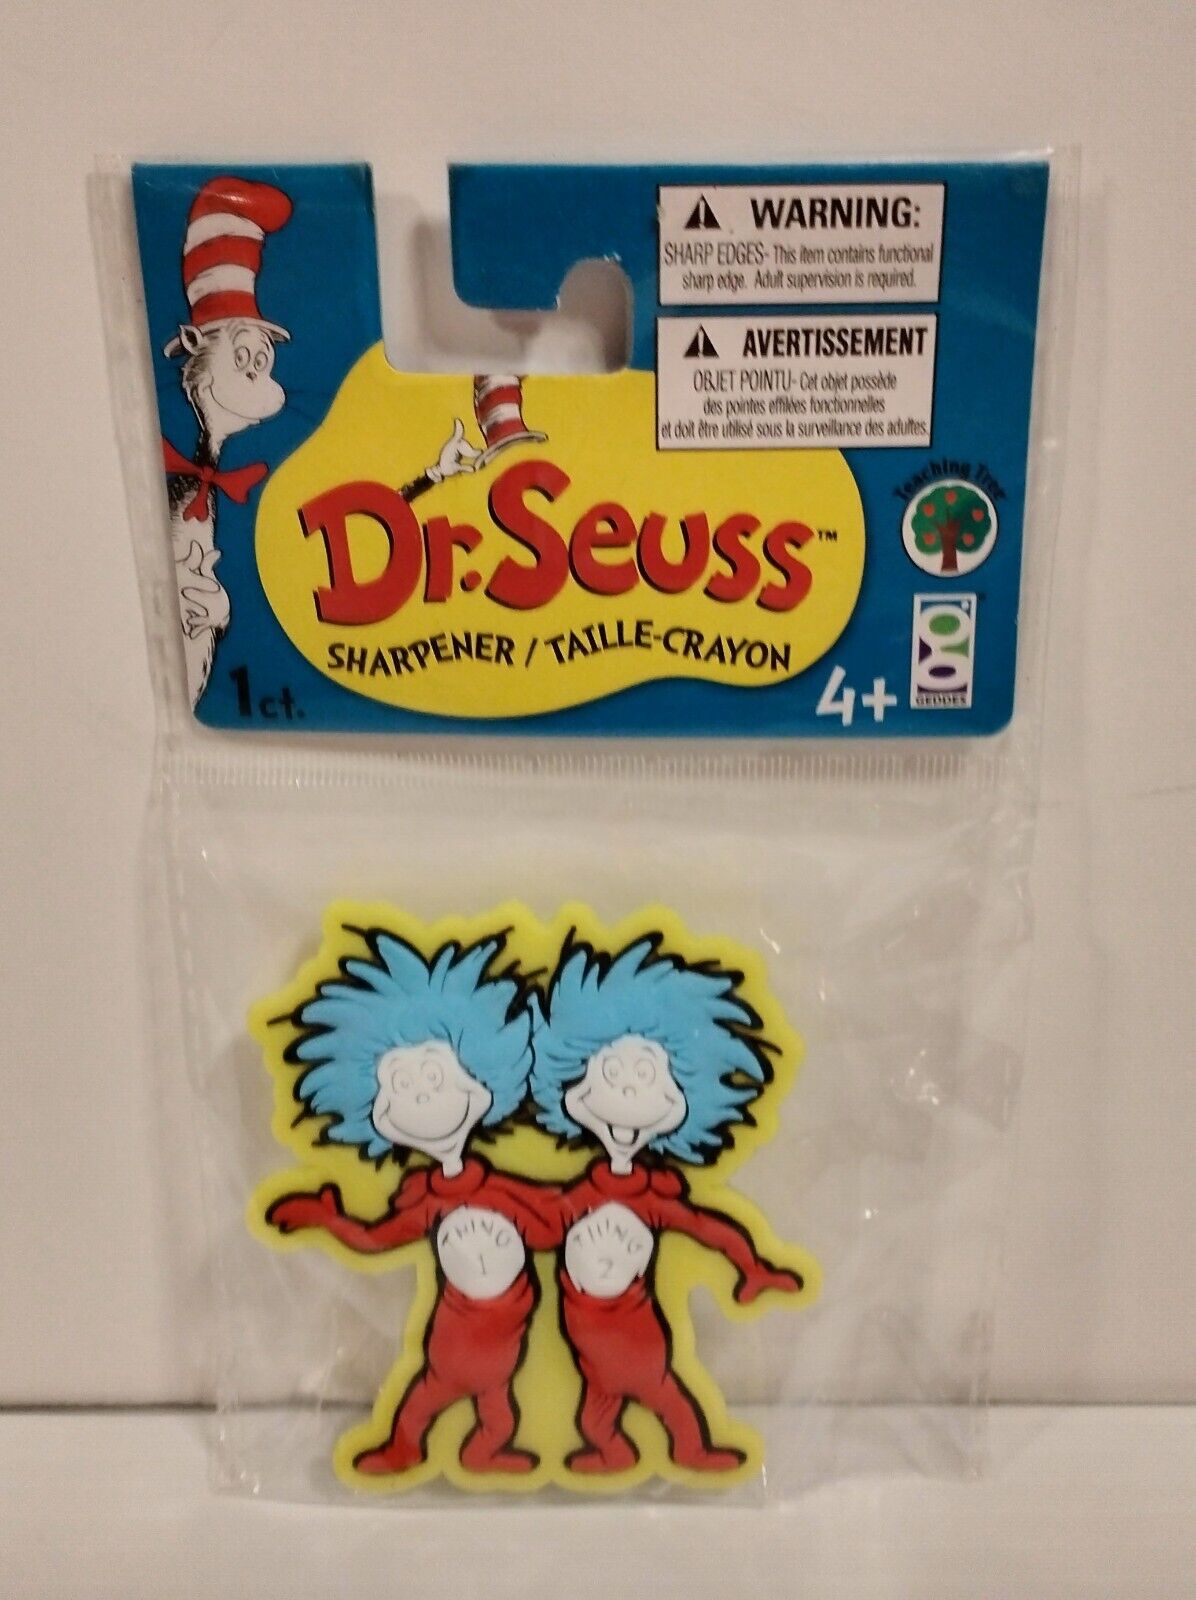 Dr. Seuss (The Thing 1 & 2) Pencil & Crayon Sharpener New Sealed 